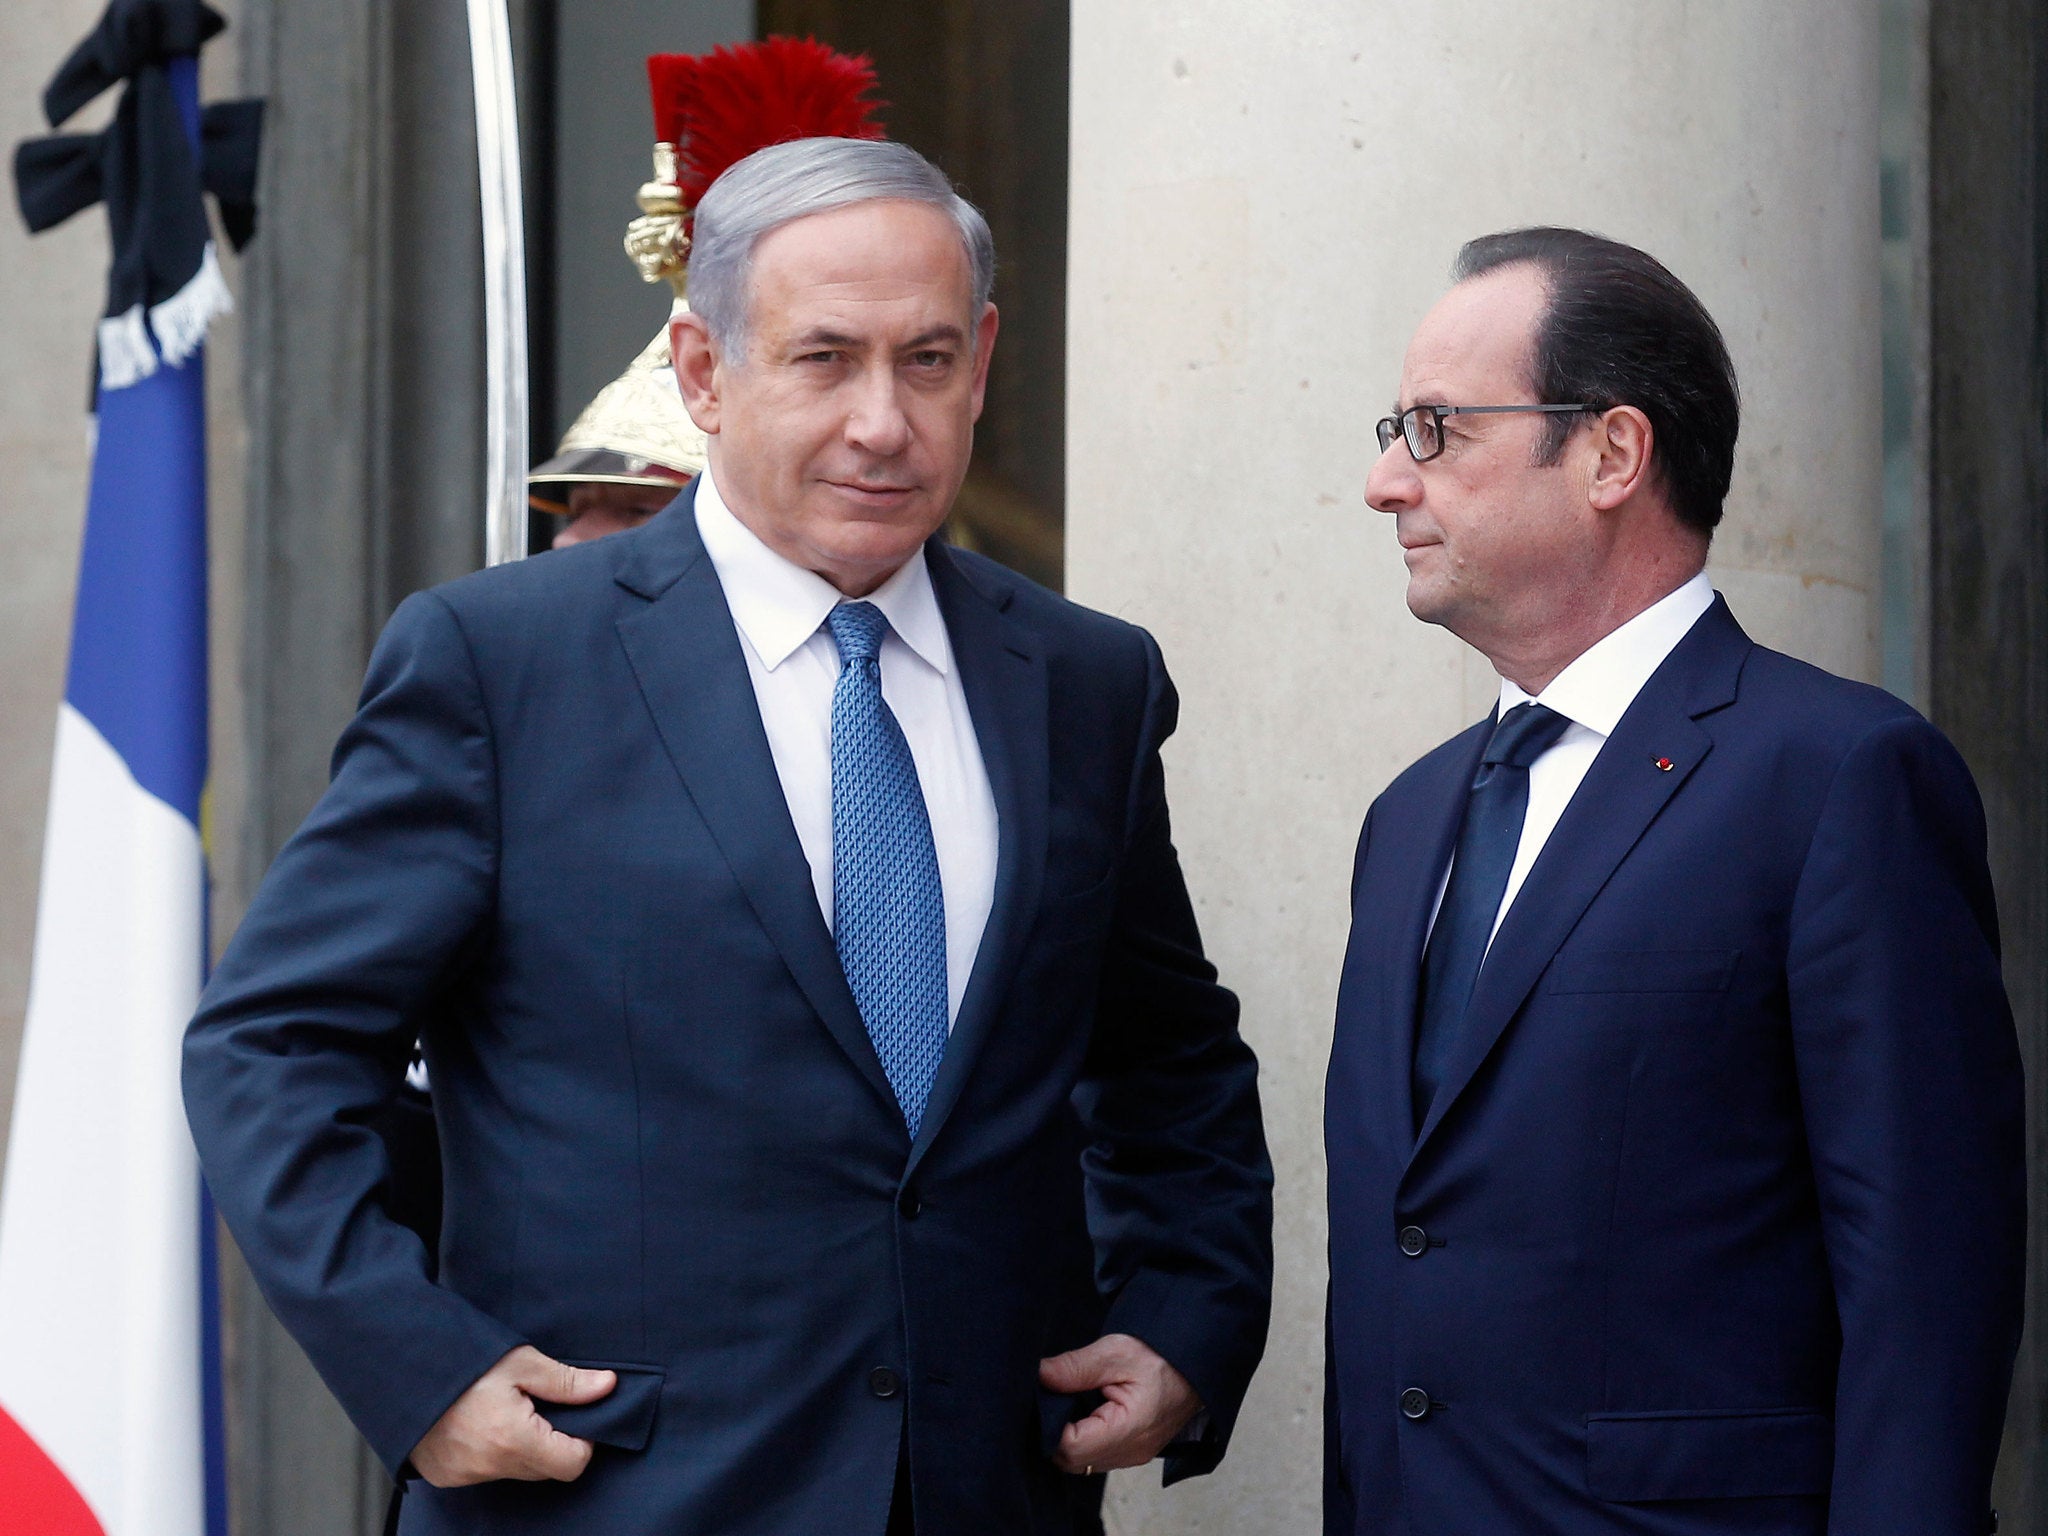 Israeli Prime Minister Benjamin Netanyahu with French President Francois Hollande ahead of Sunday's Paris march